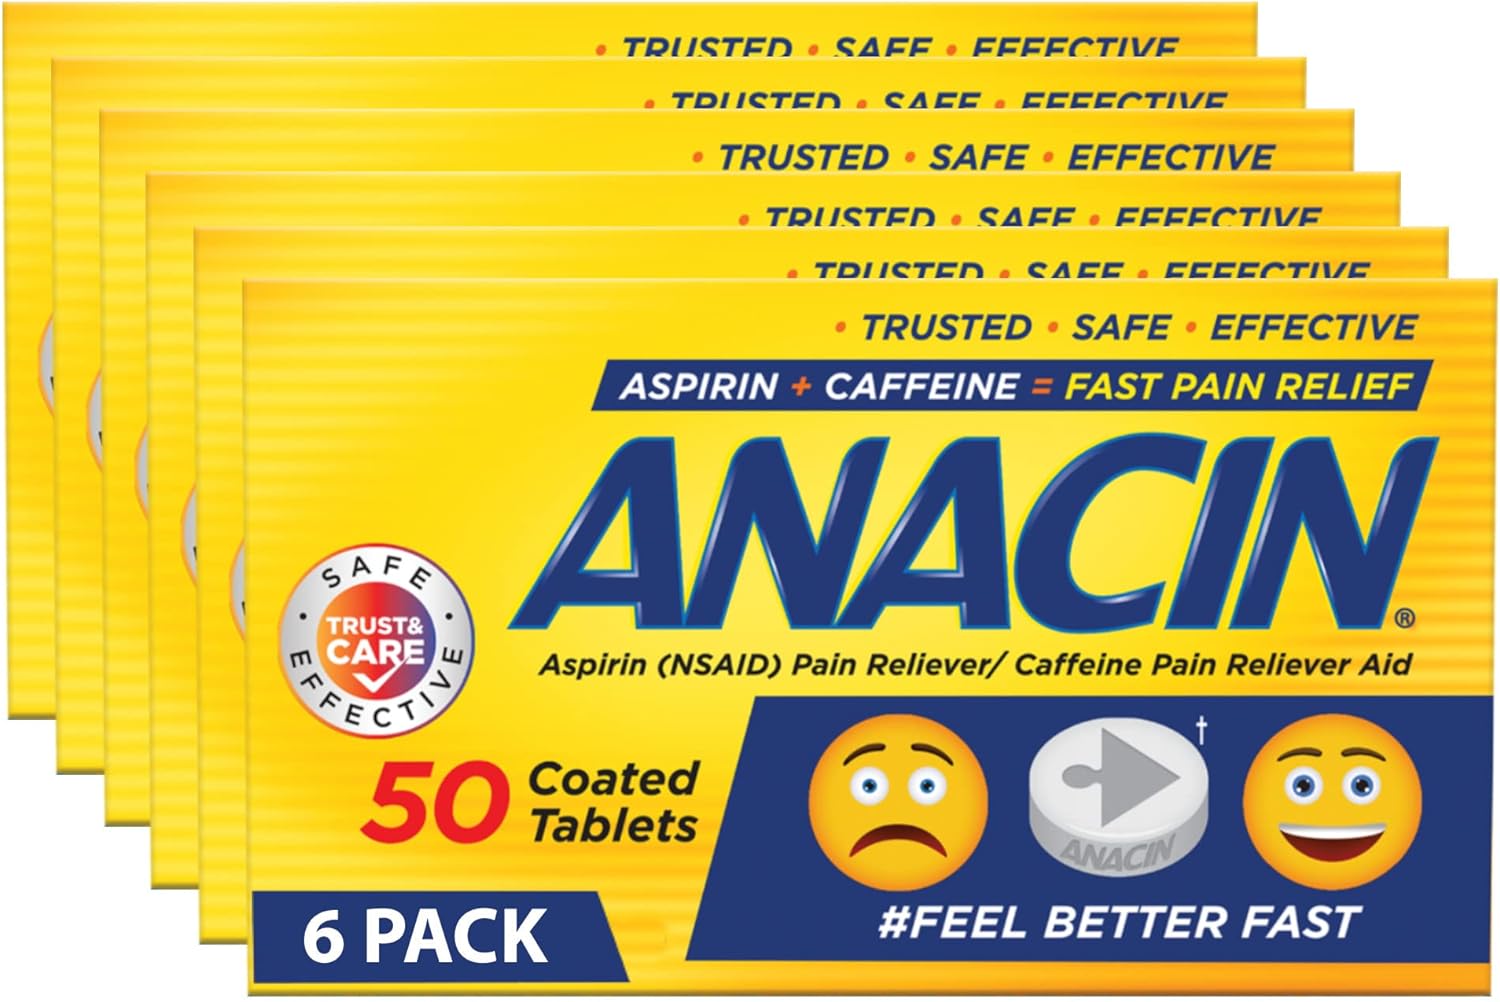 ANACIN- Fast Pain Relief (NSAID) Caffeine Pain Reliever Aid, 50 Tablet